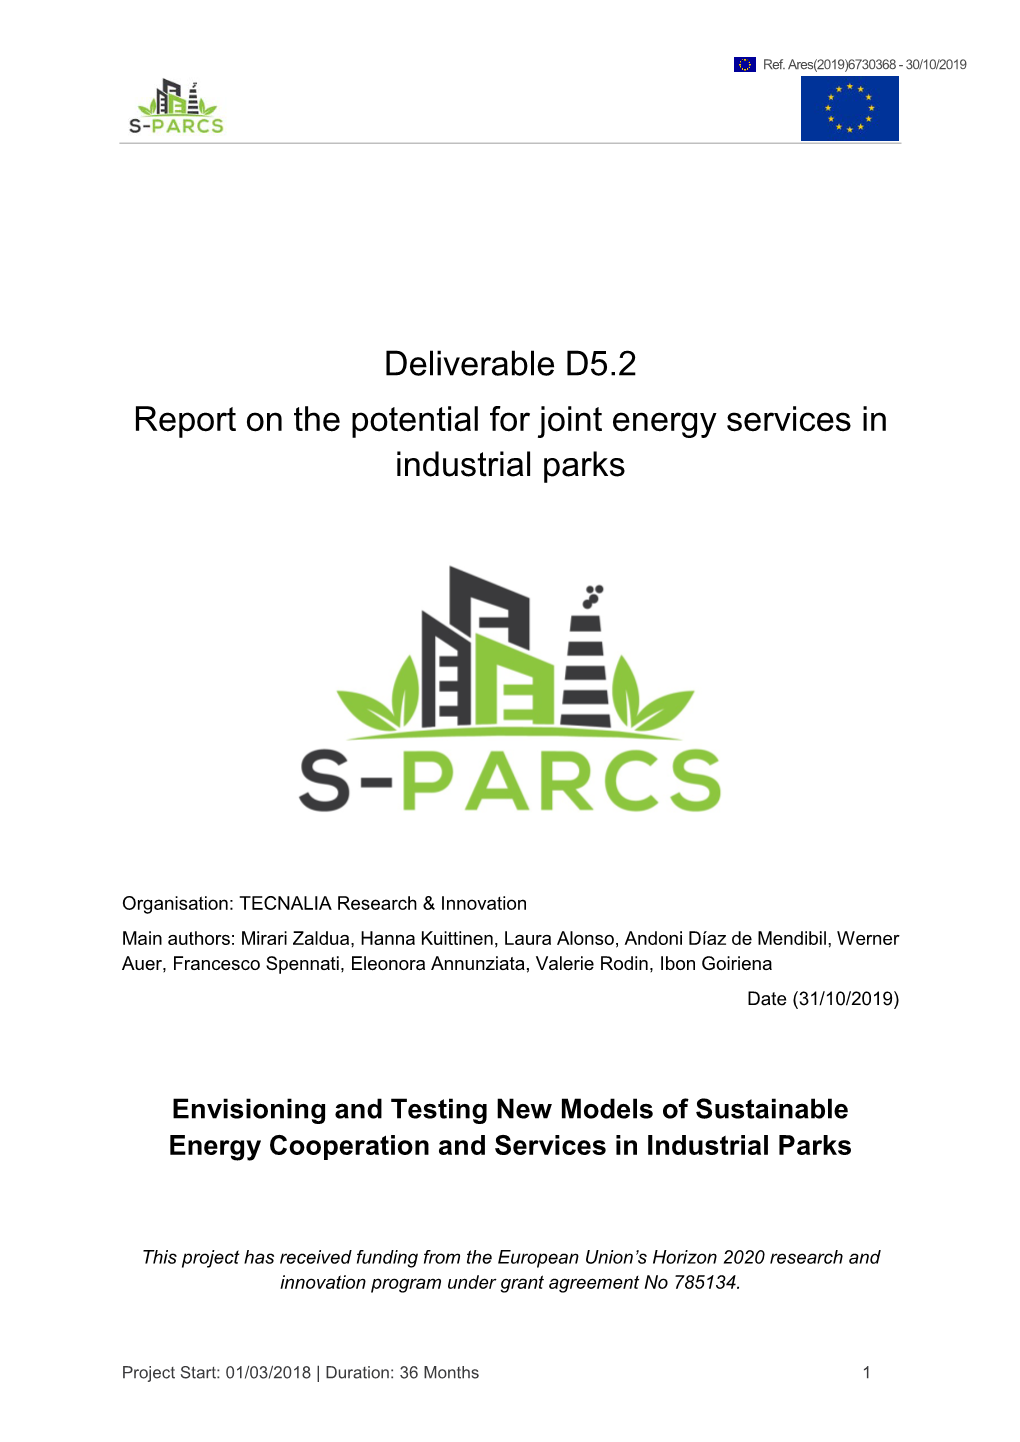 Deliverable D5.2 Report on the Potential for Joint Energy Services in Industrial Parks